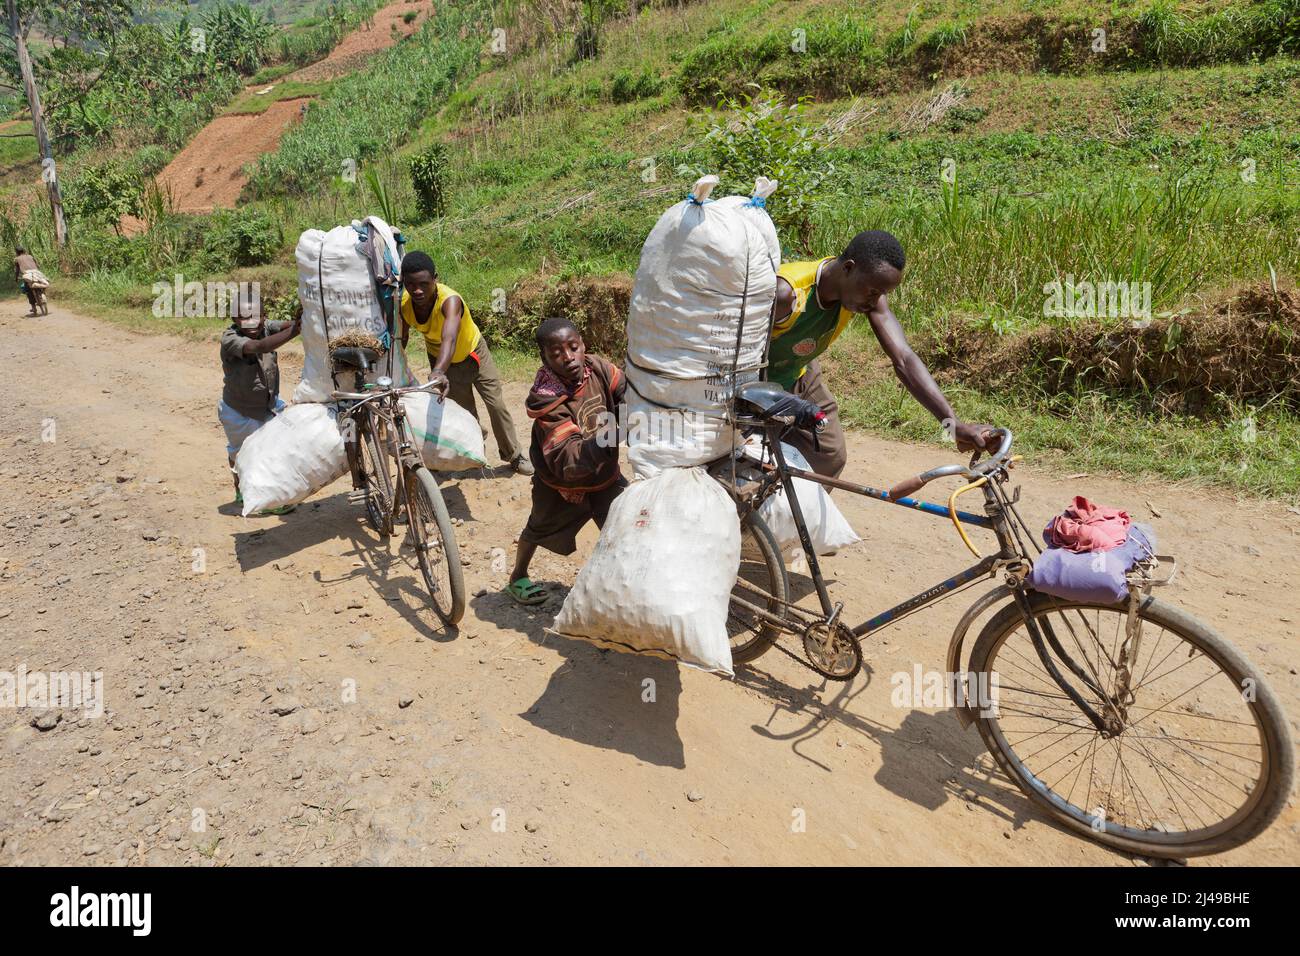 People push bikes loaded with produce on the long journey towards town for sale, Gasiza cell, Kivuruga sector, Gakenke disrict.   Photograph by Mike Goldwater Stock Photo